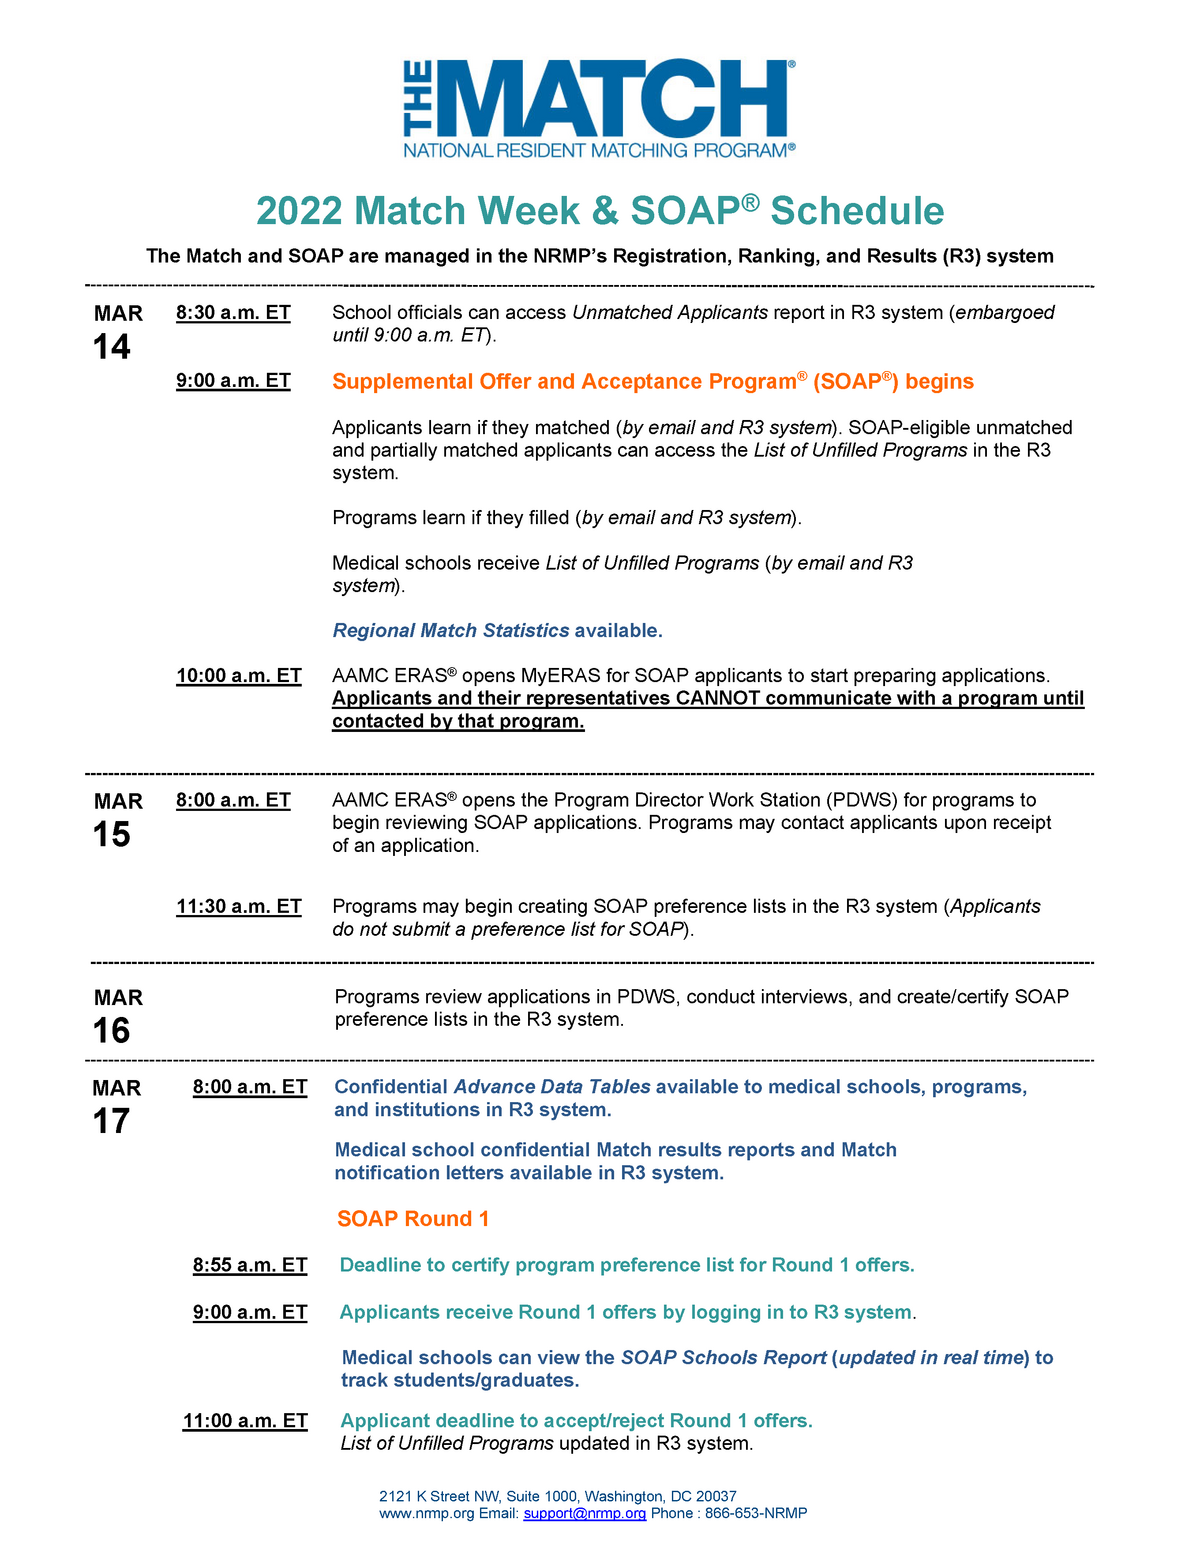 2022 Match Week and SOAP Schedule 2121 K Street NW, Suite 1000